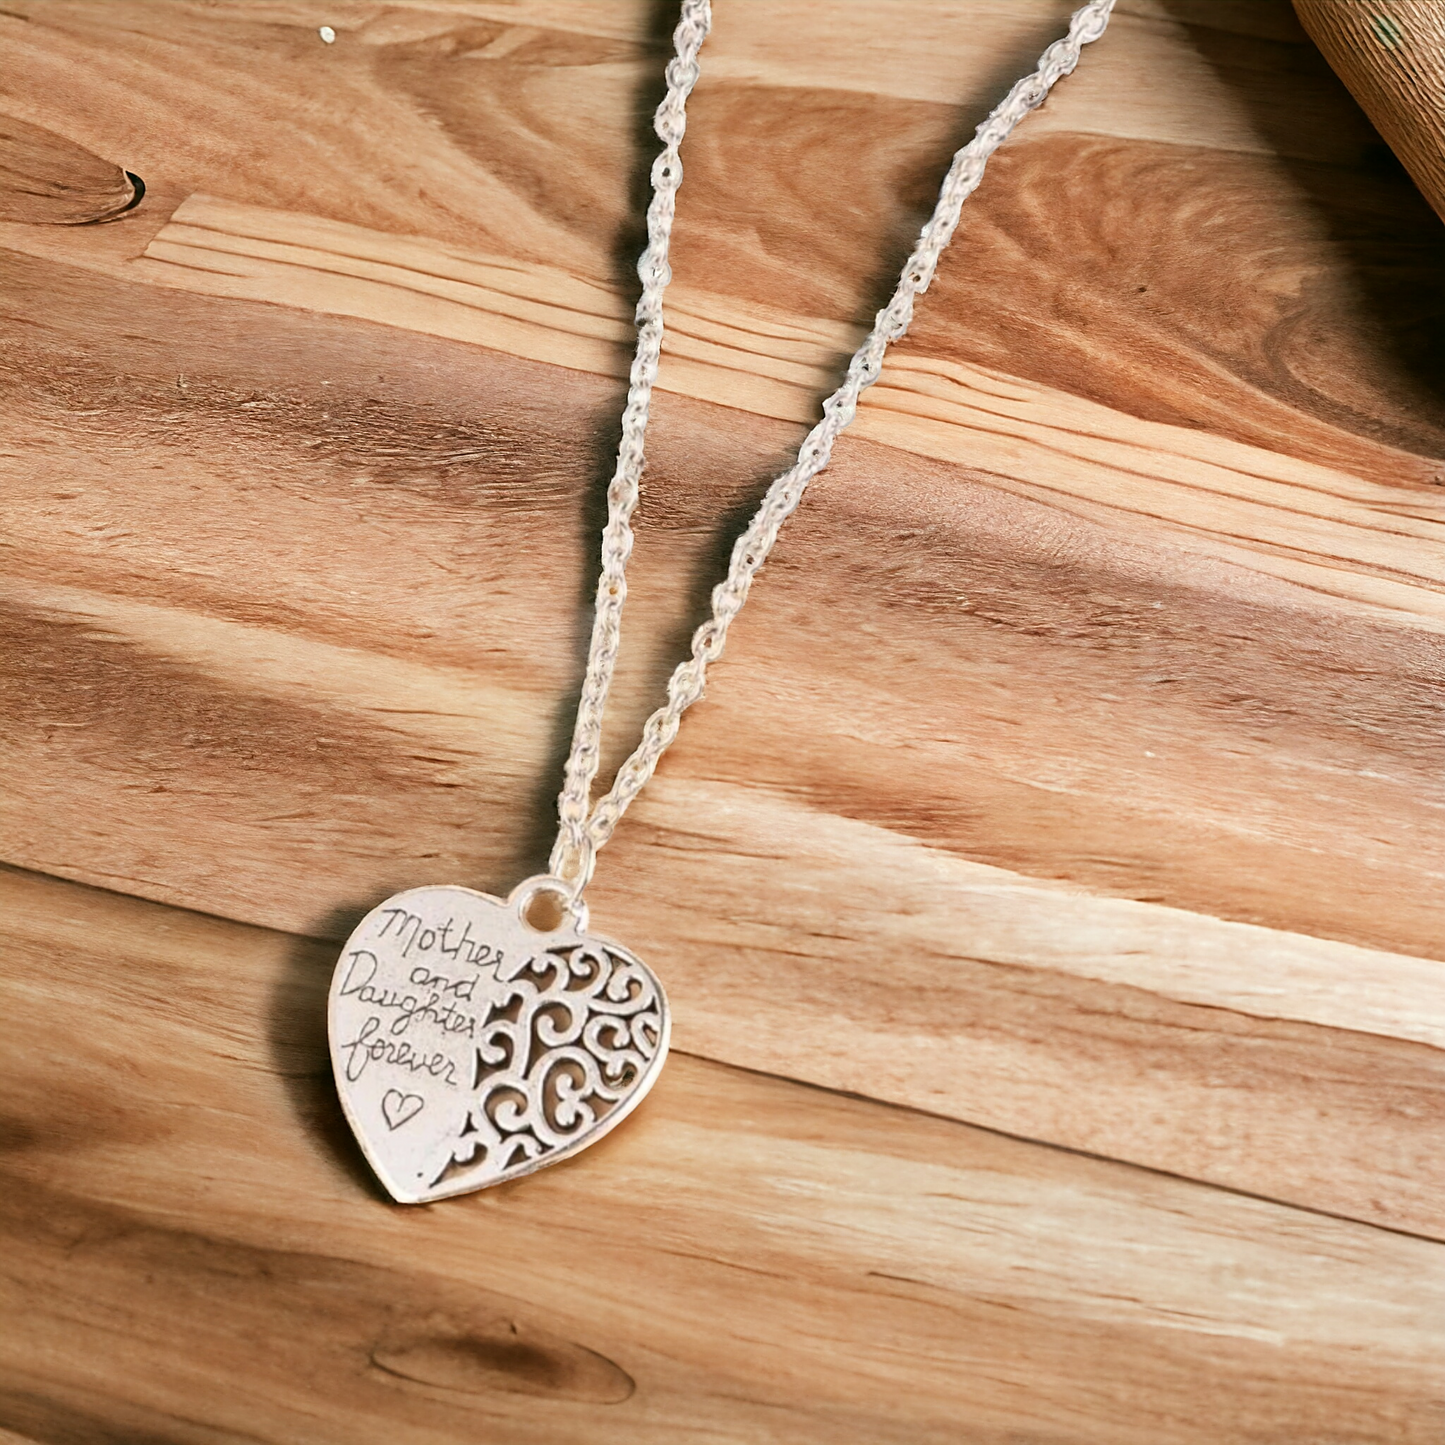 A Mother & daughter's love necklace